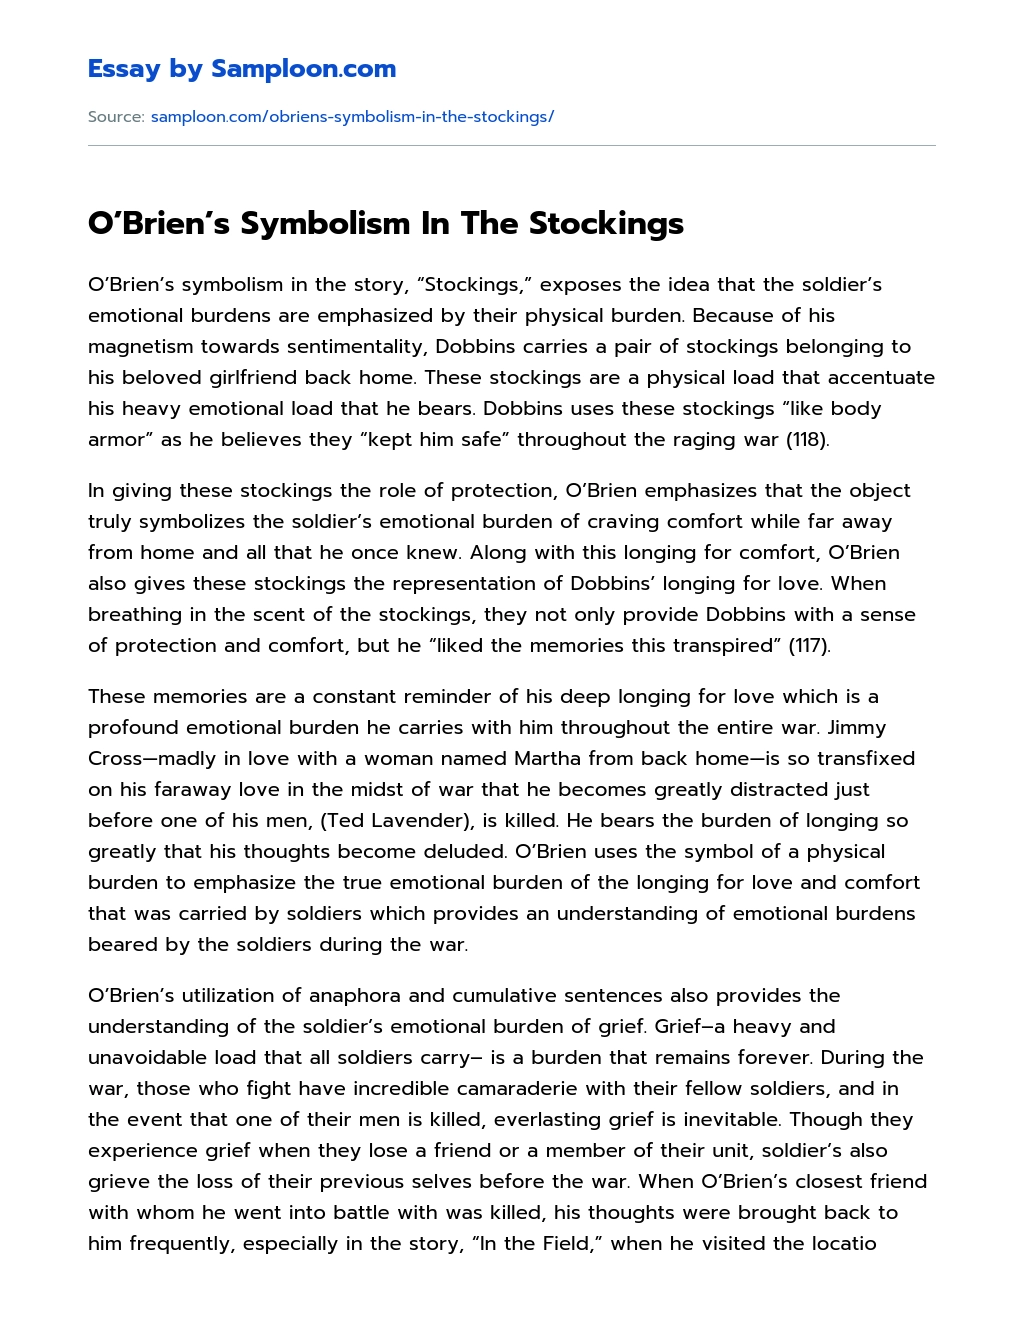 O’Brien’s Symbolism In The Stockings essay